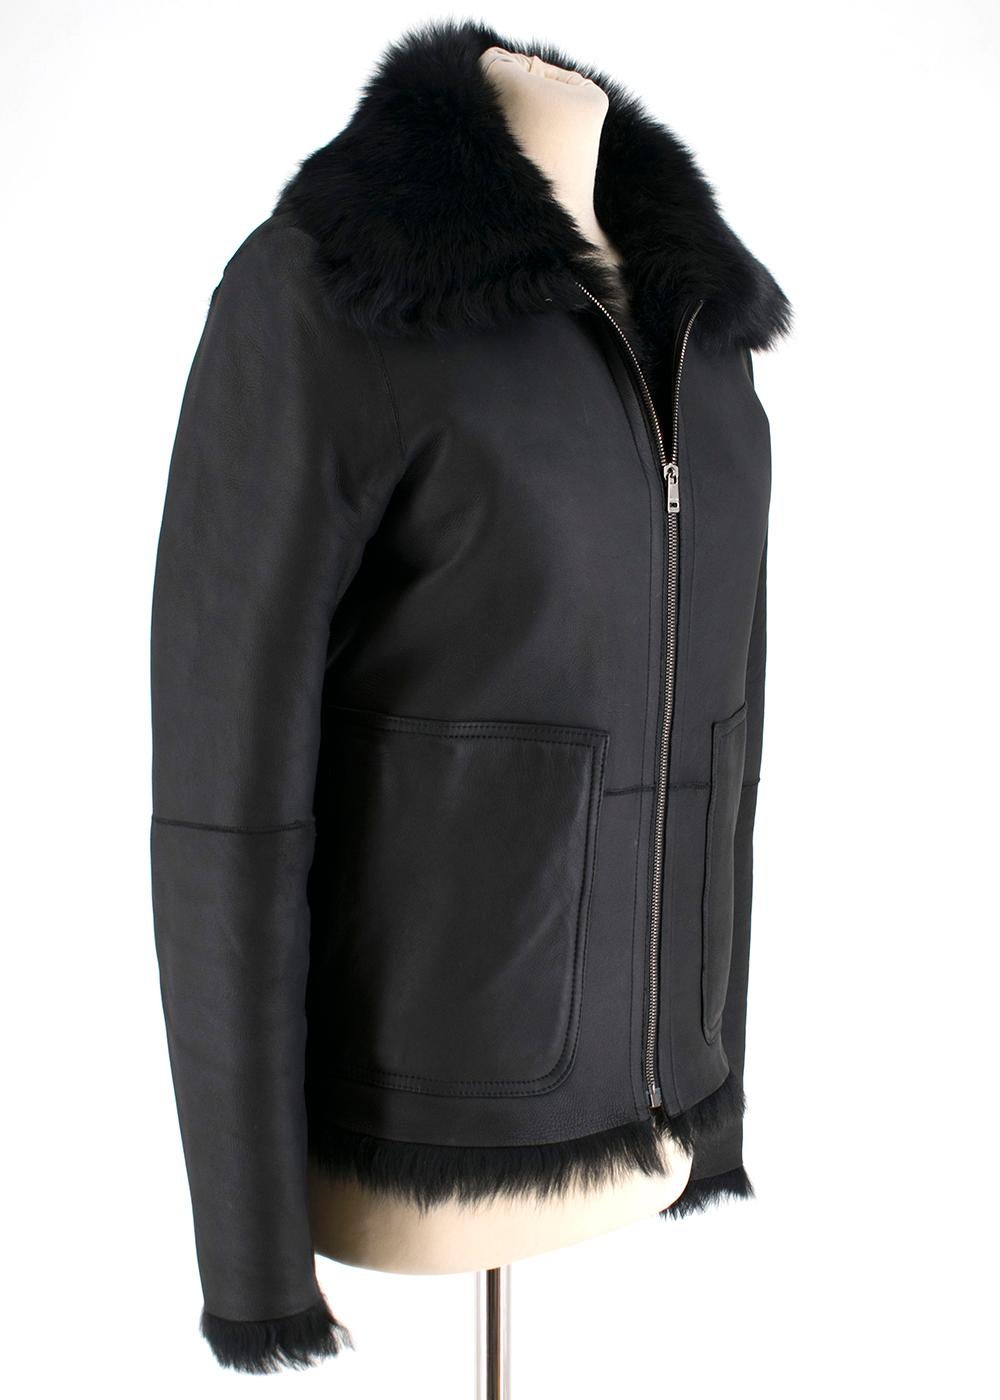 Black lambskin jacket with a fur lining, silver hardware, and a matte finish. Buttery leather mixed with an enveloping fur lining makes this a fantastic piece for consistent wear. RRP £1950


Please note, these items are pre-owned and may show signs